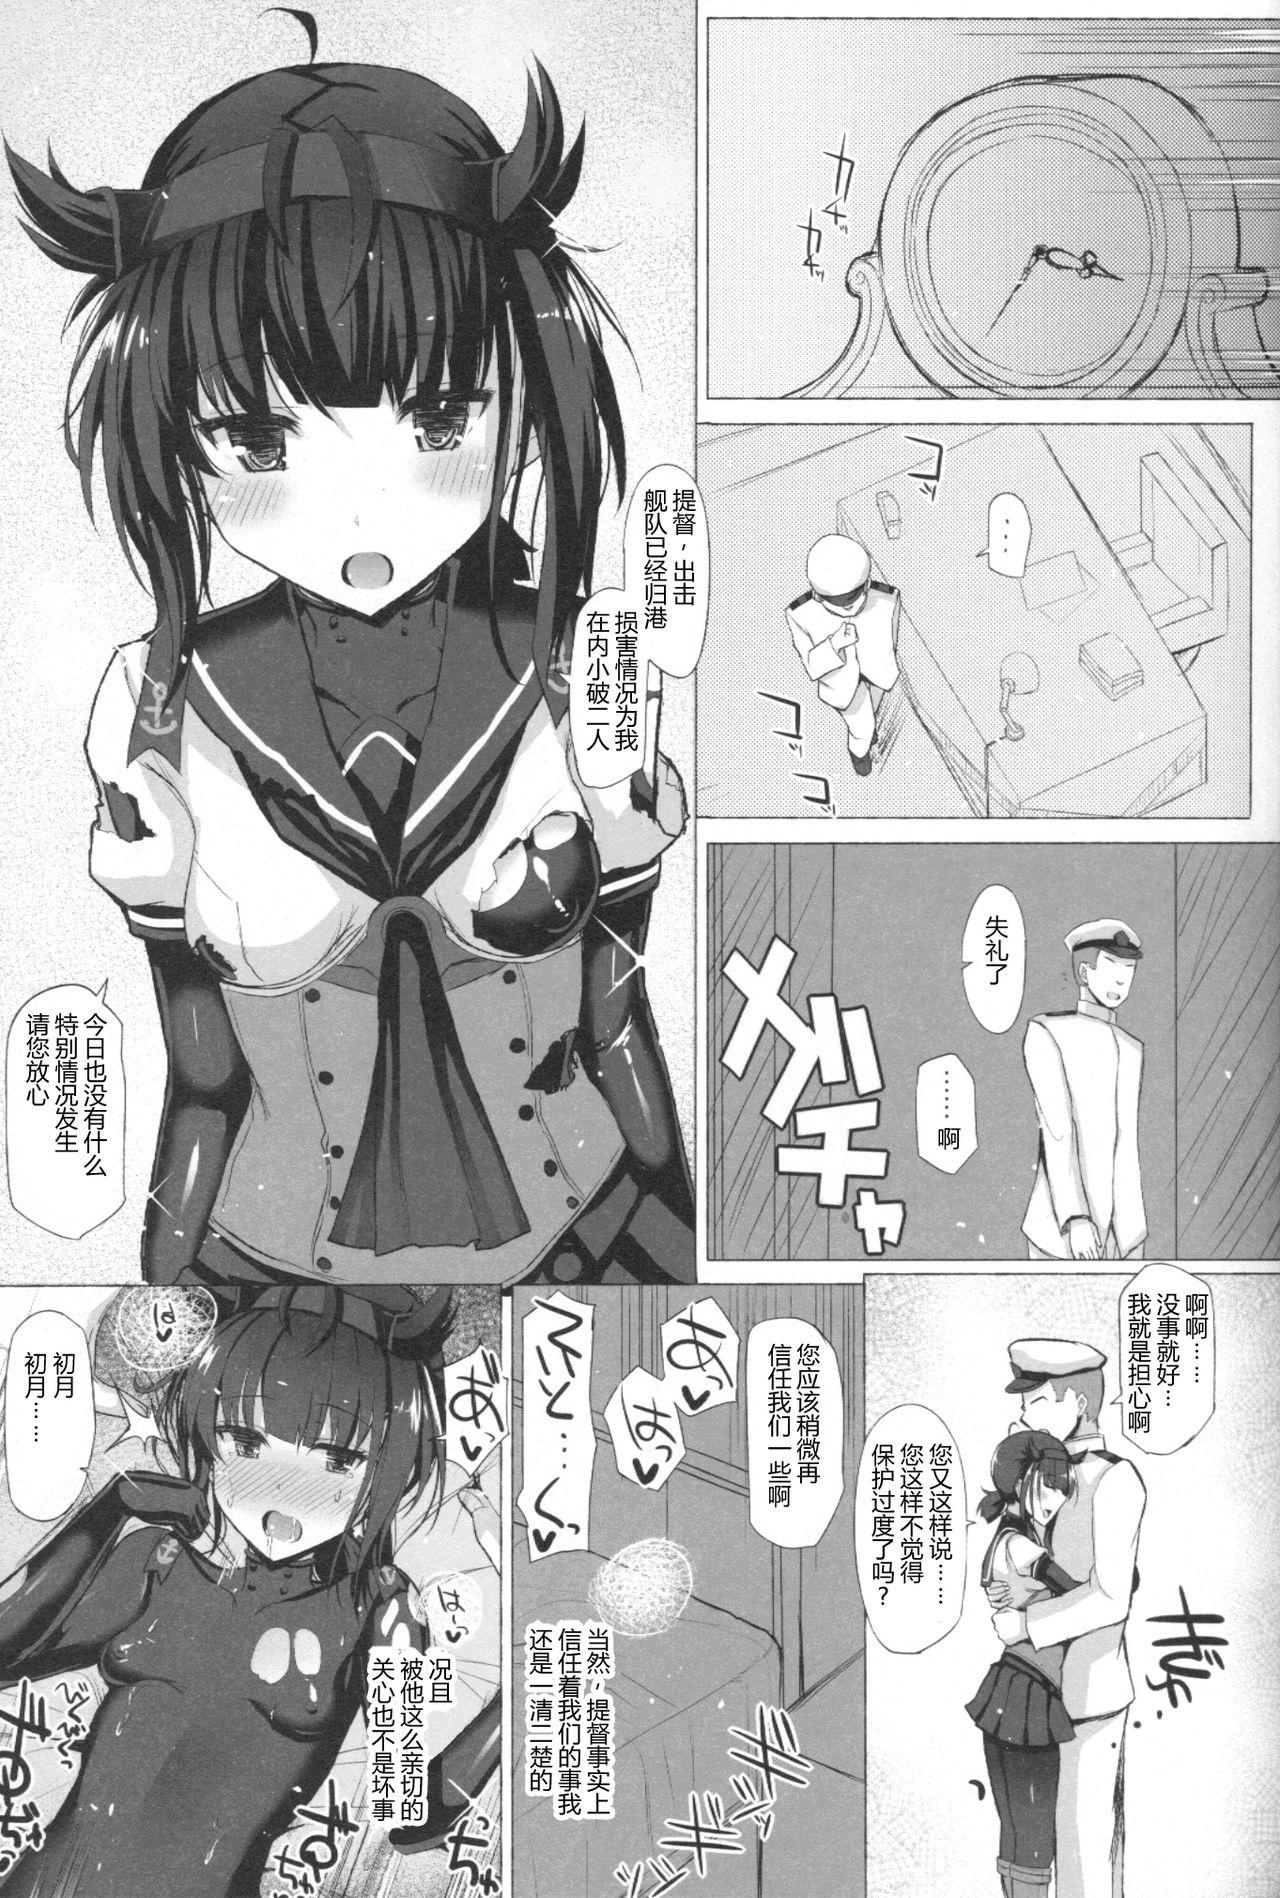 Freak LOVE IS THE DRUG - Kantai collection Cock - Page 2